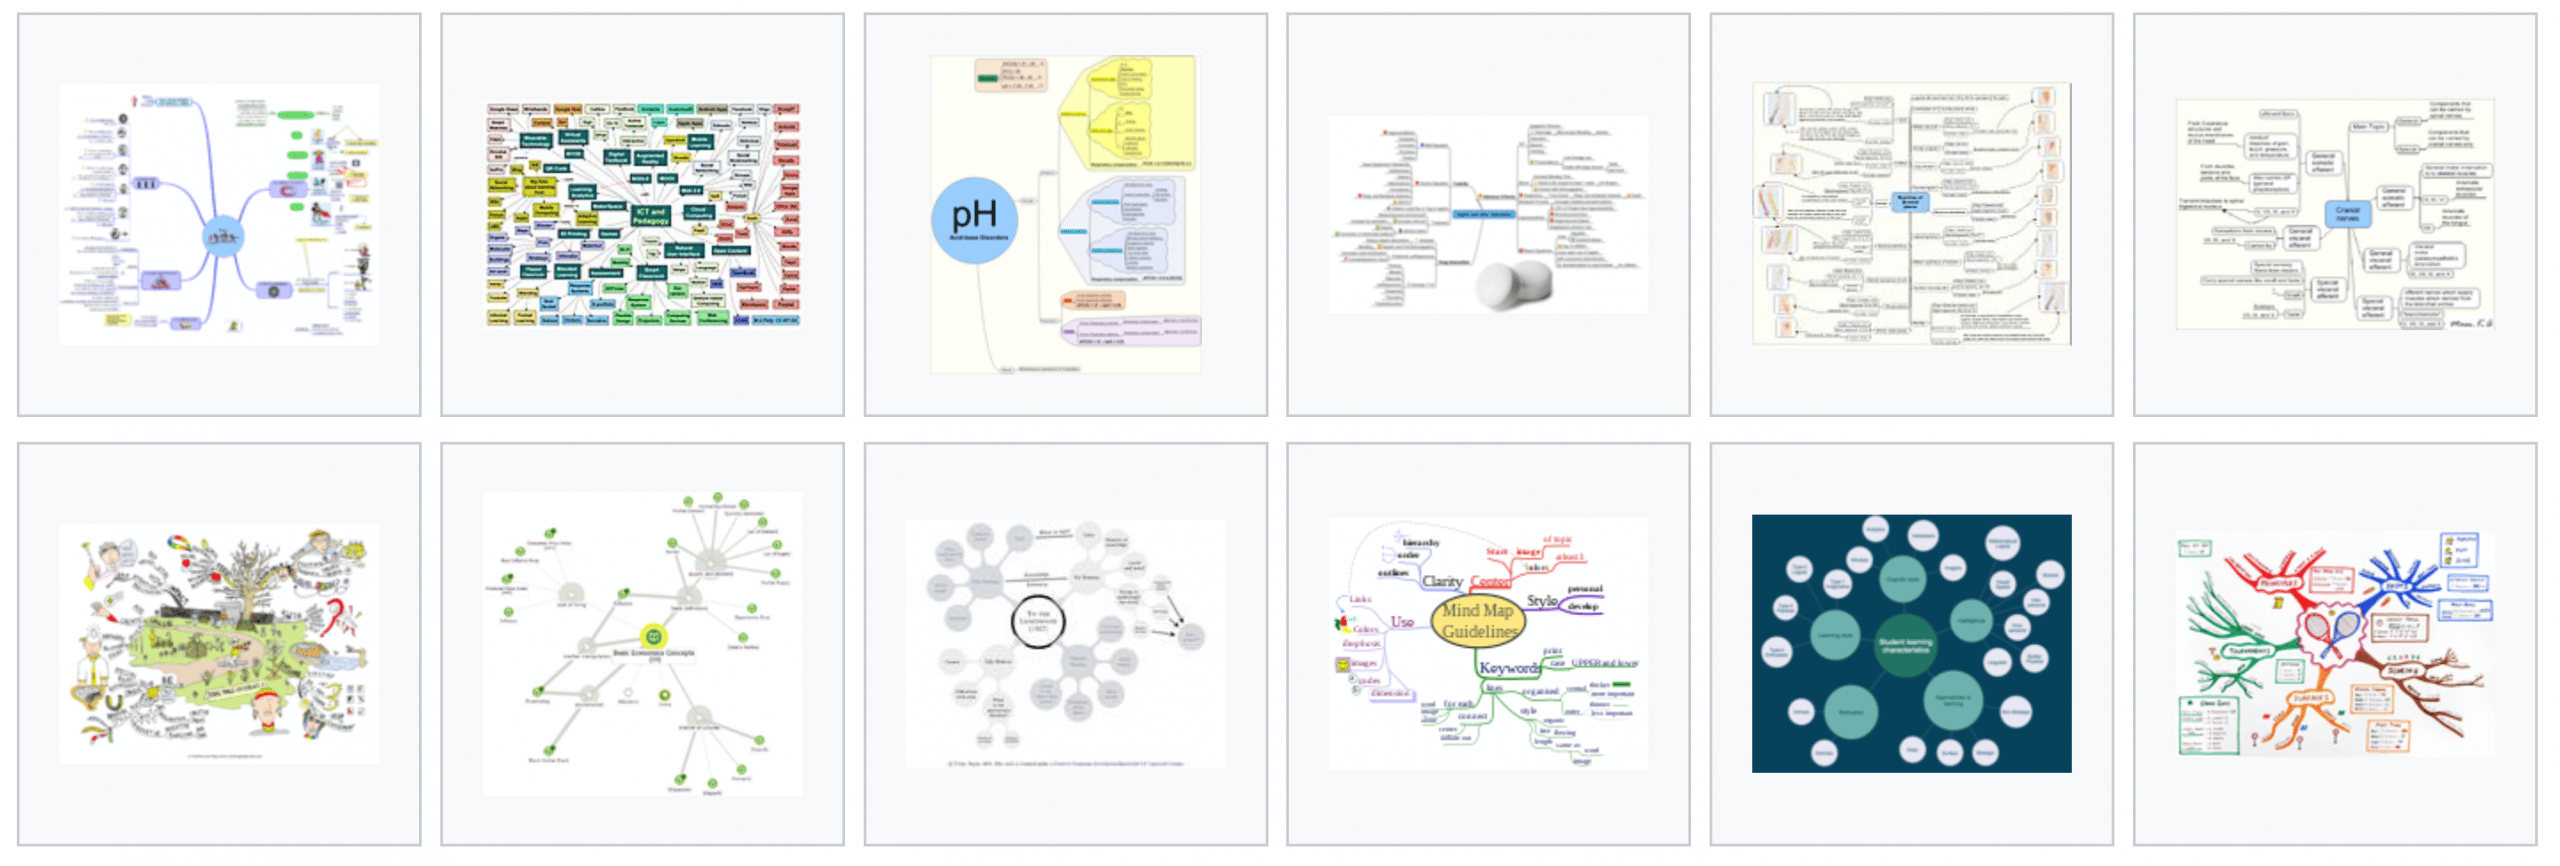 mind map examples online